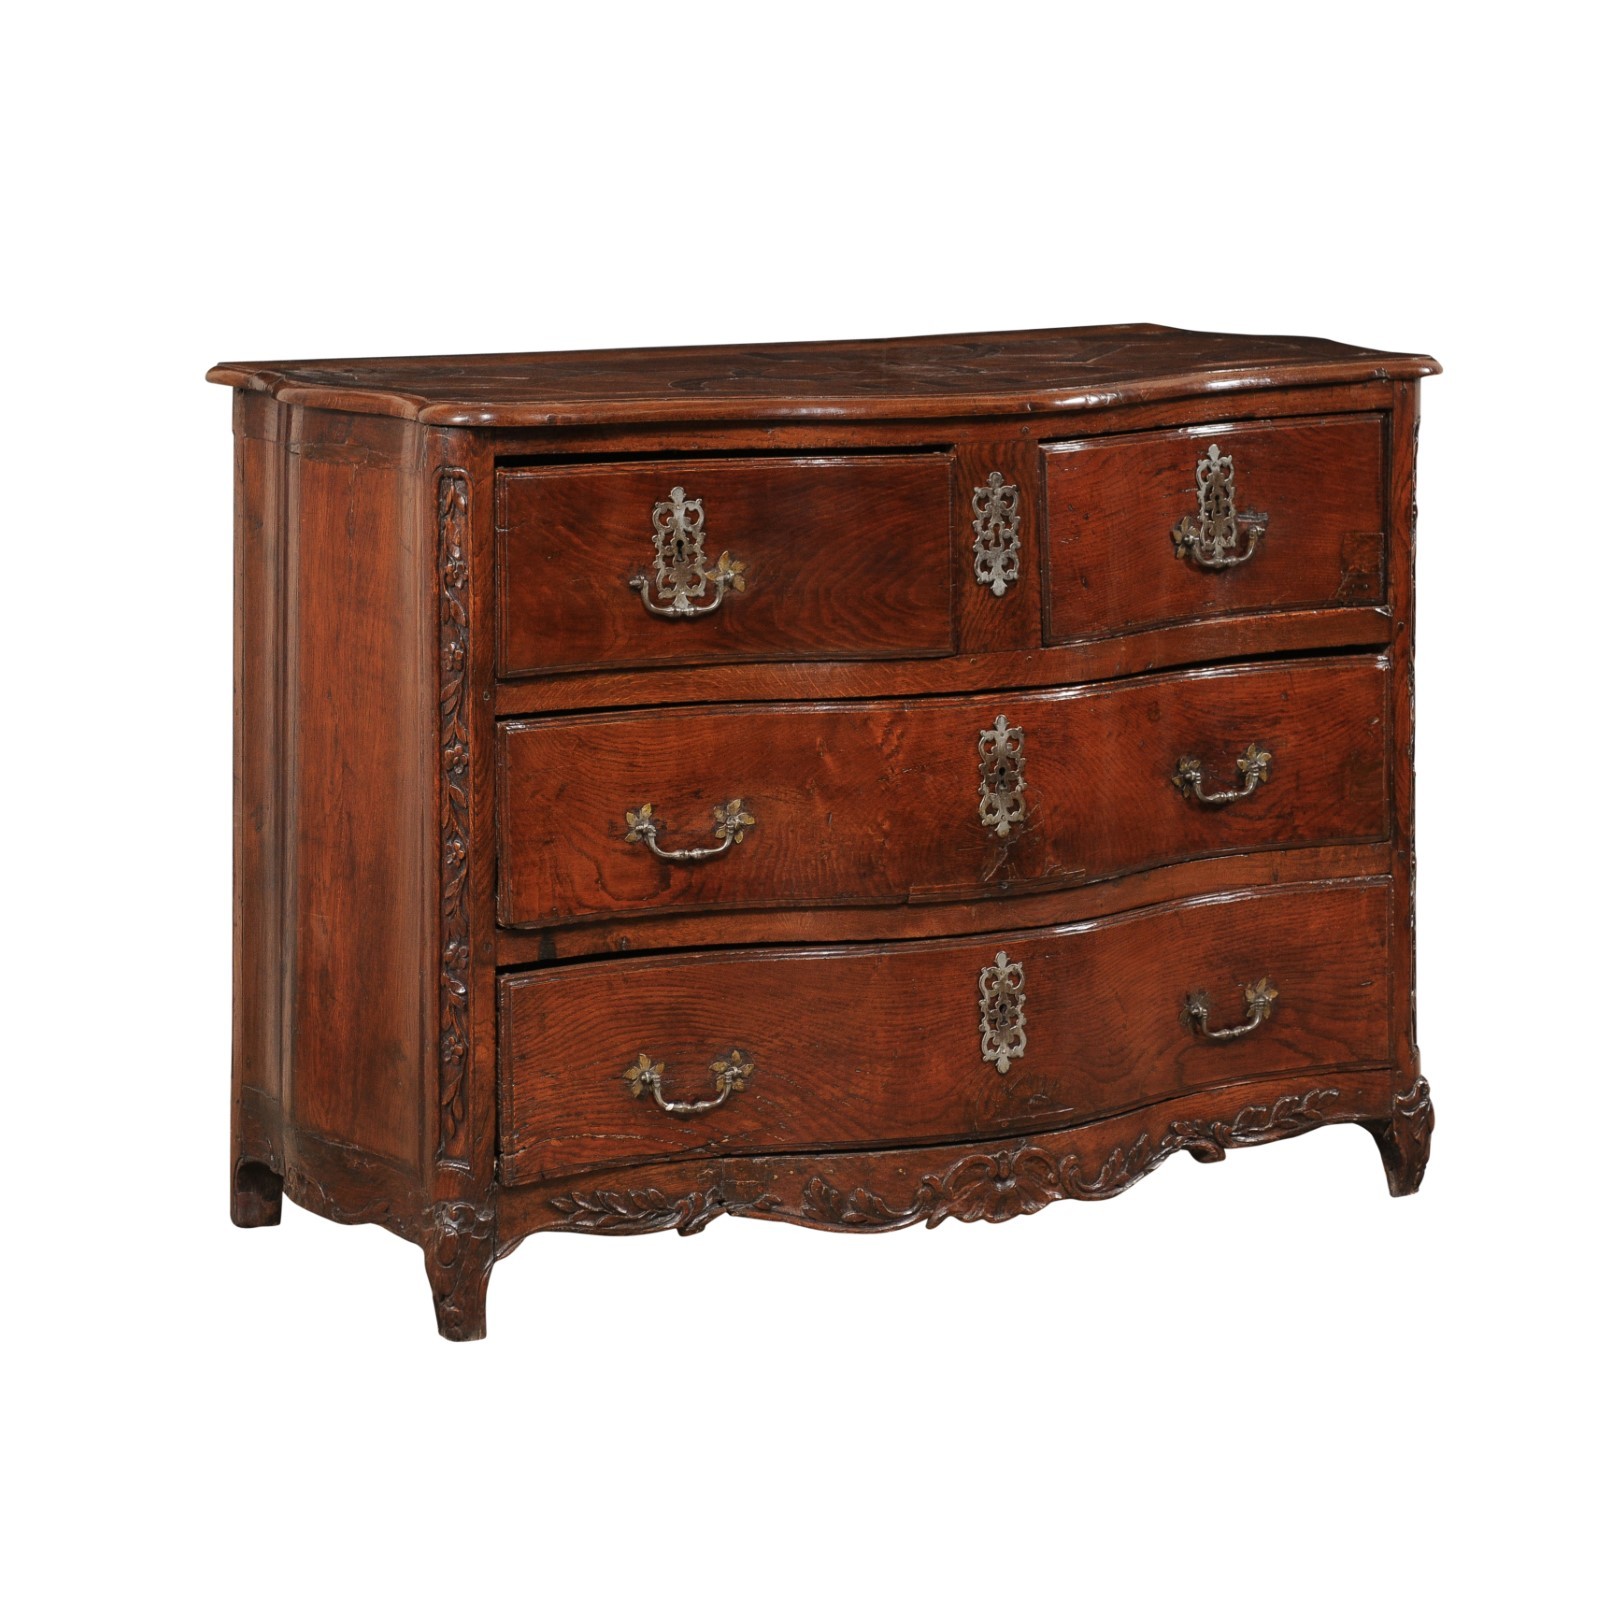 18th C. French Régence Serpentine Commode